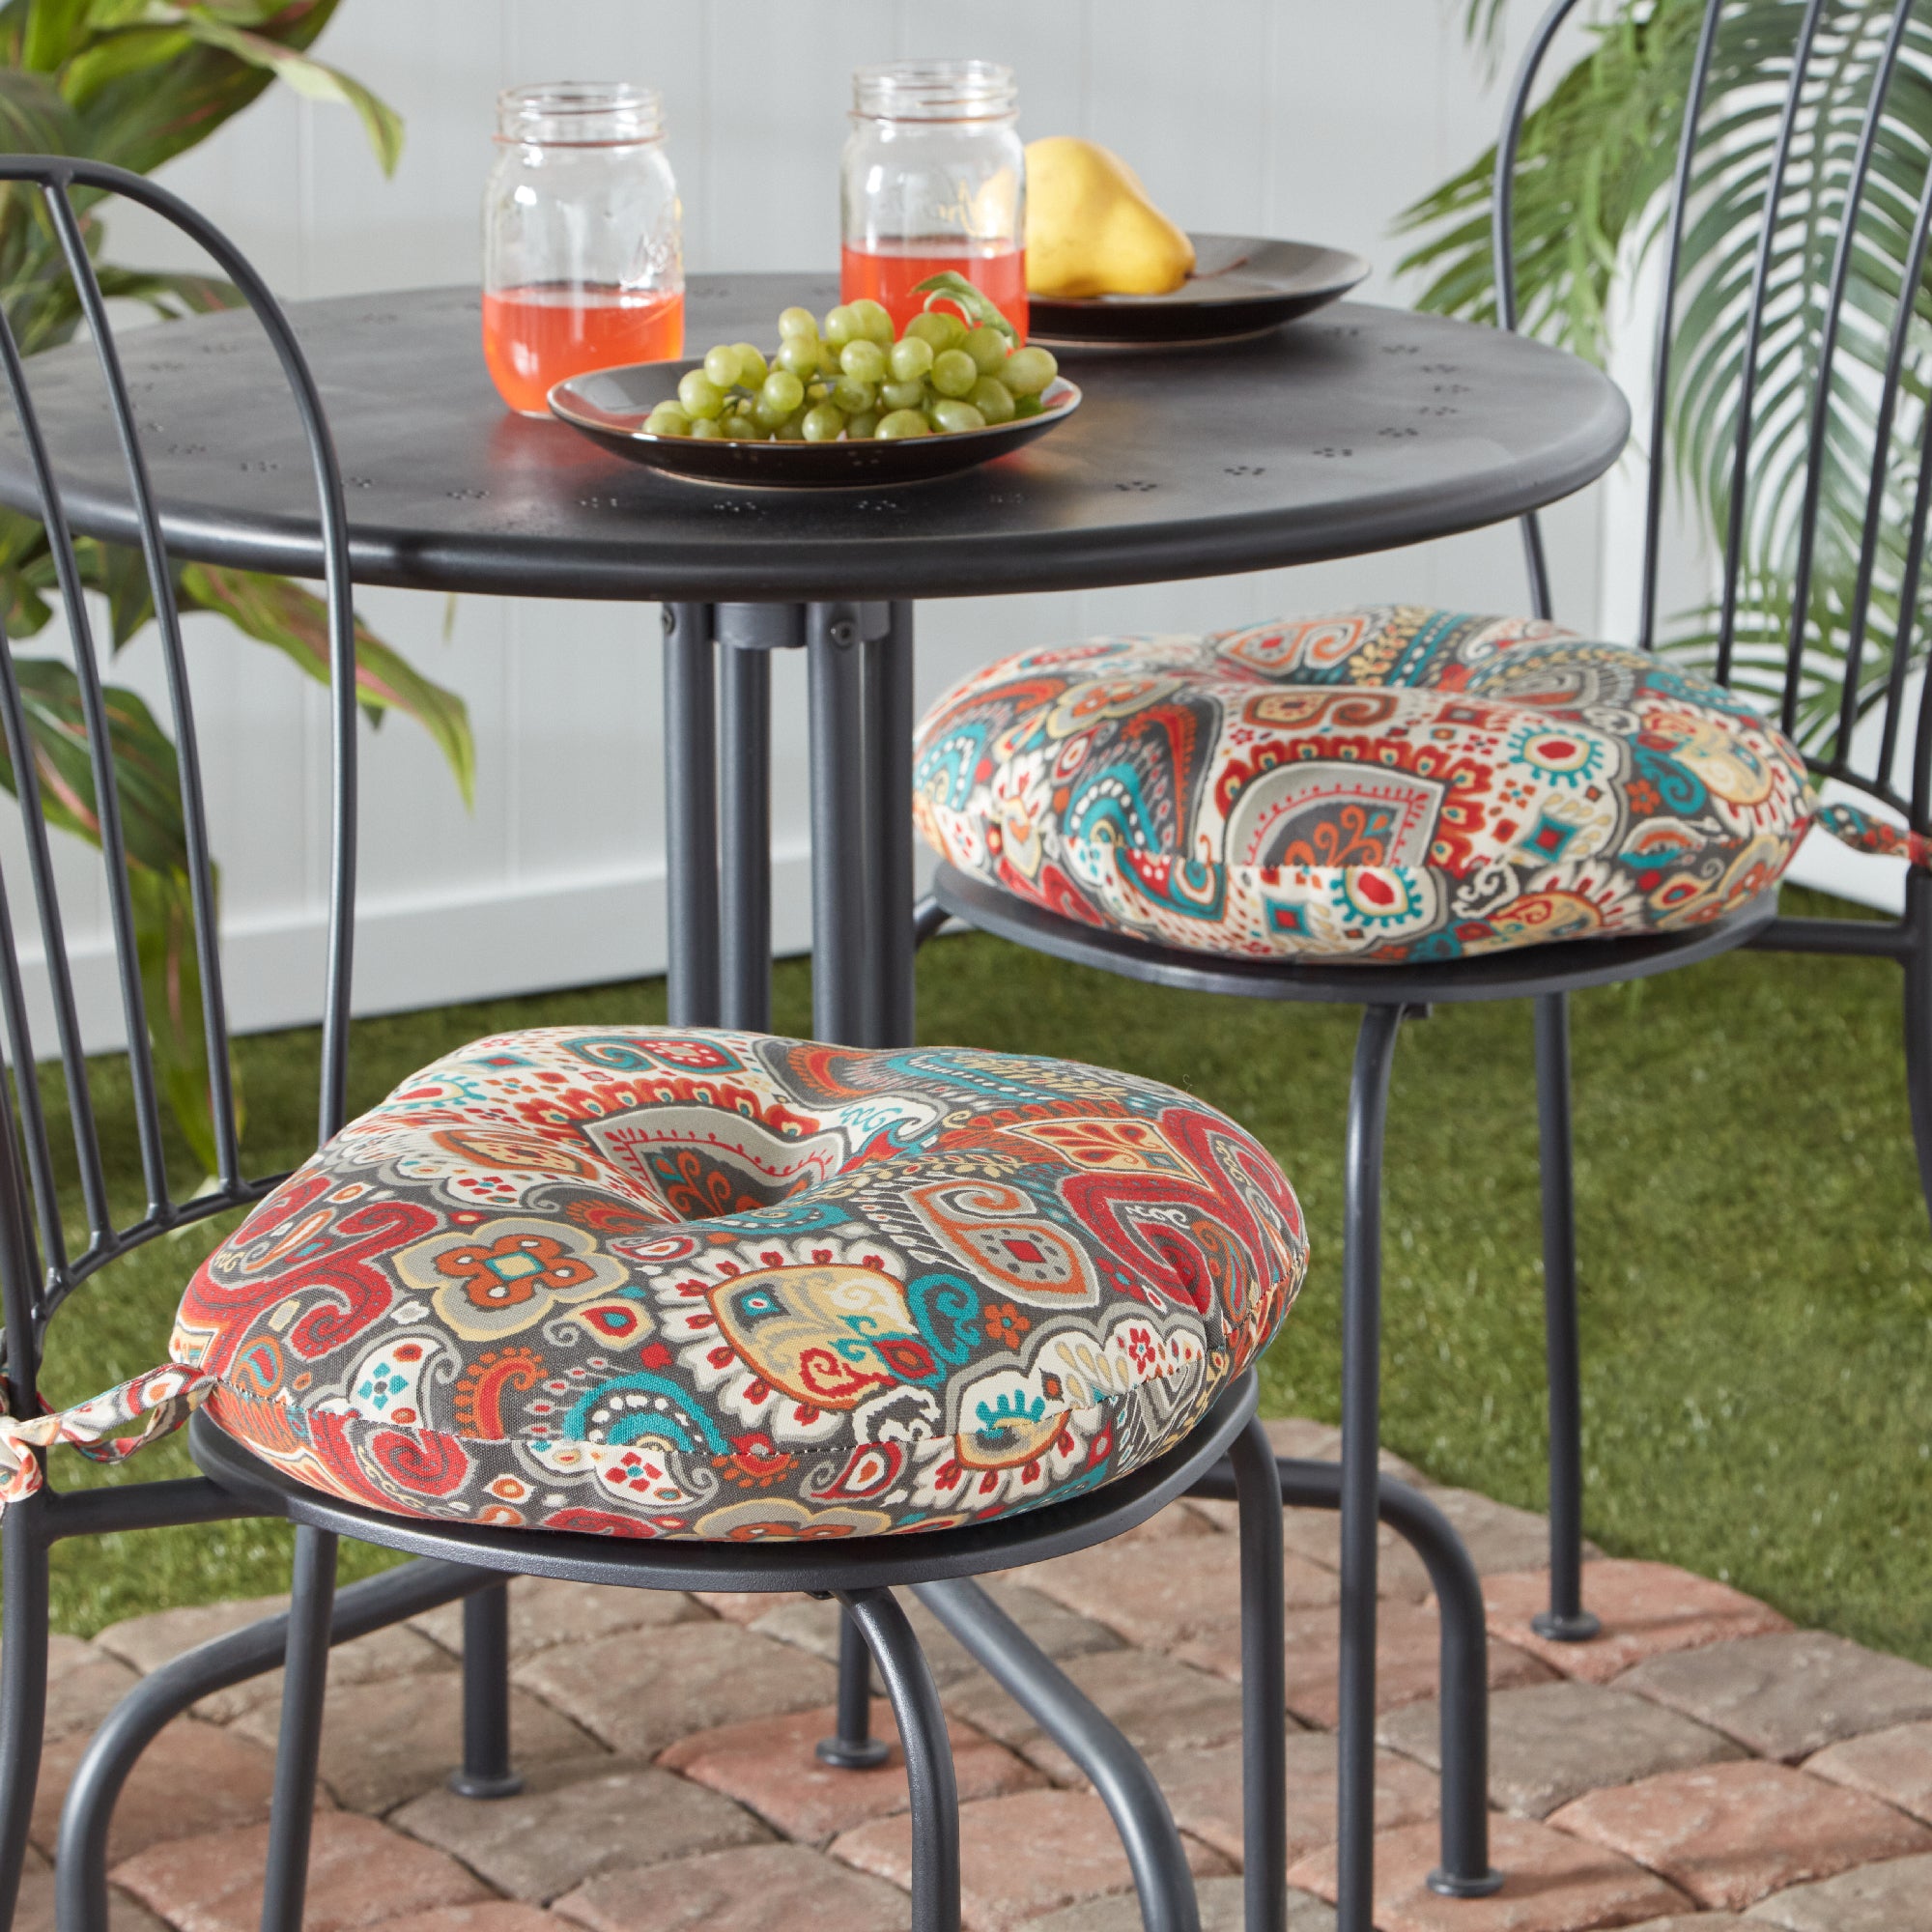 Greendale Home Fashions Denim 15 in. Round Outdoor Reversible Bistro Seat Cushion (Set of 2) - image 5 of 70